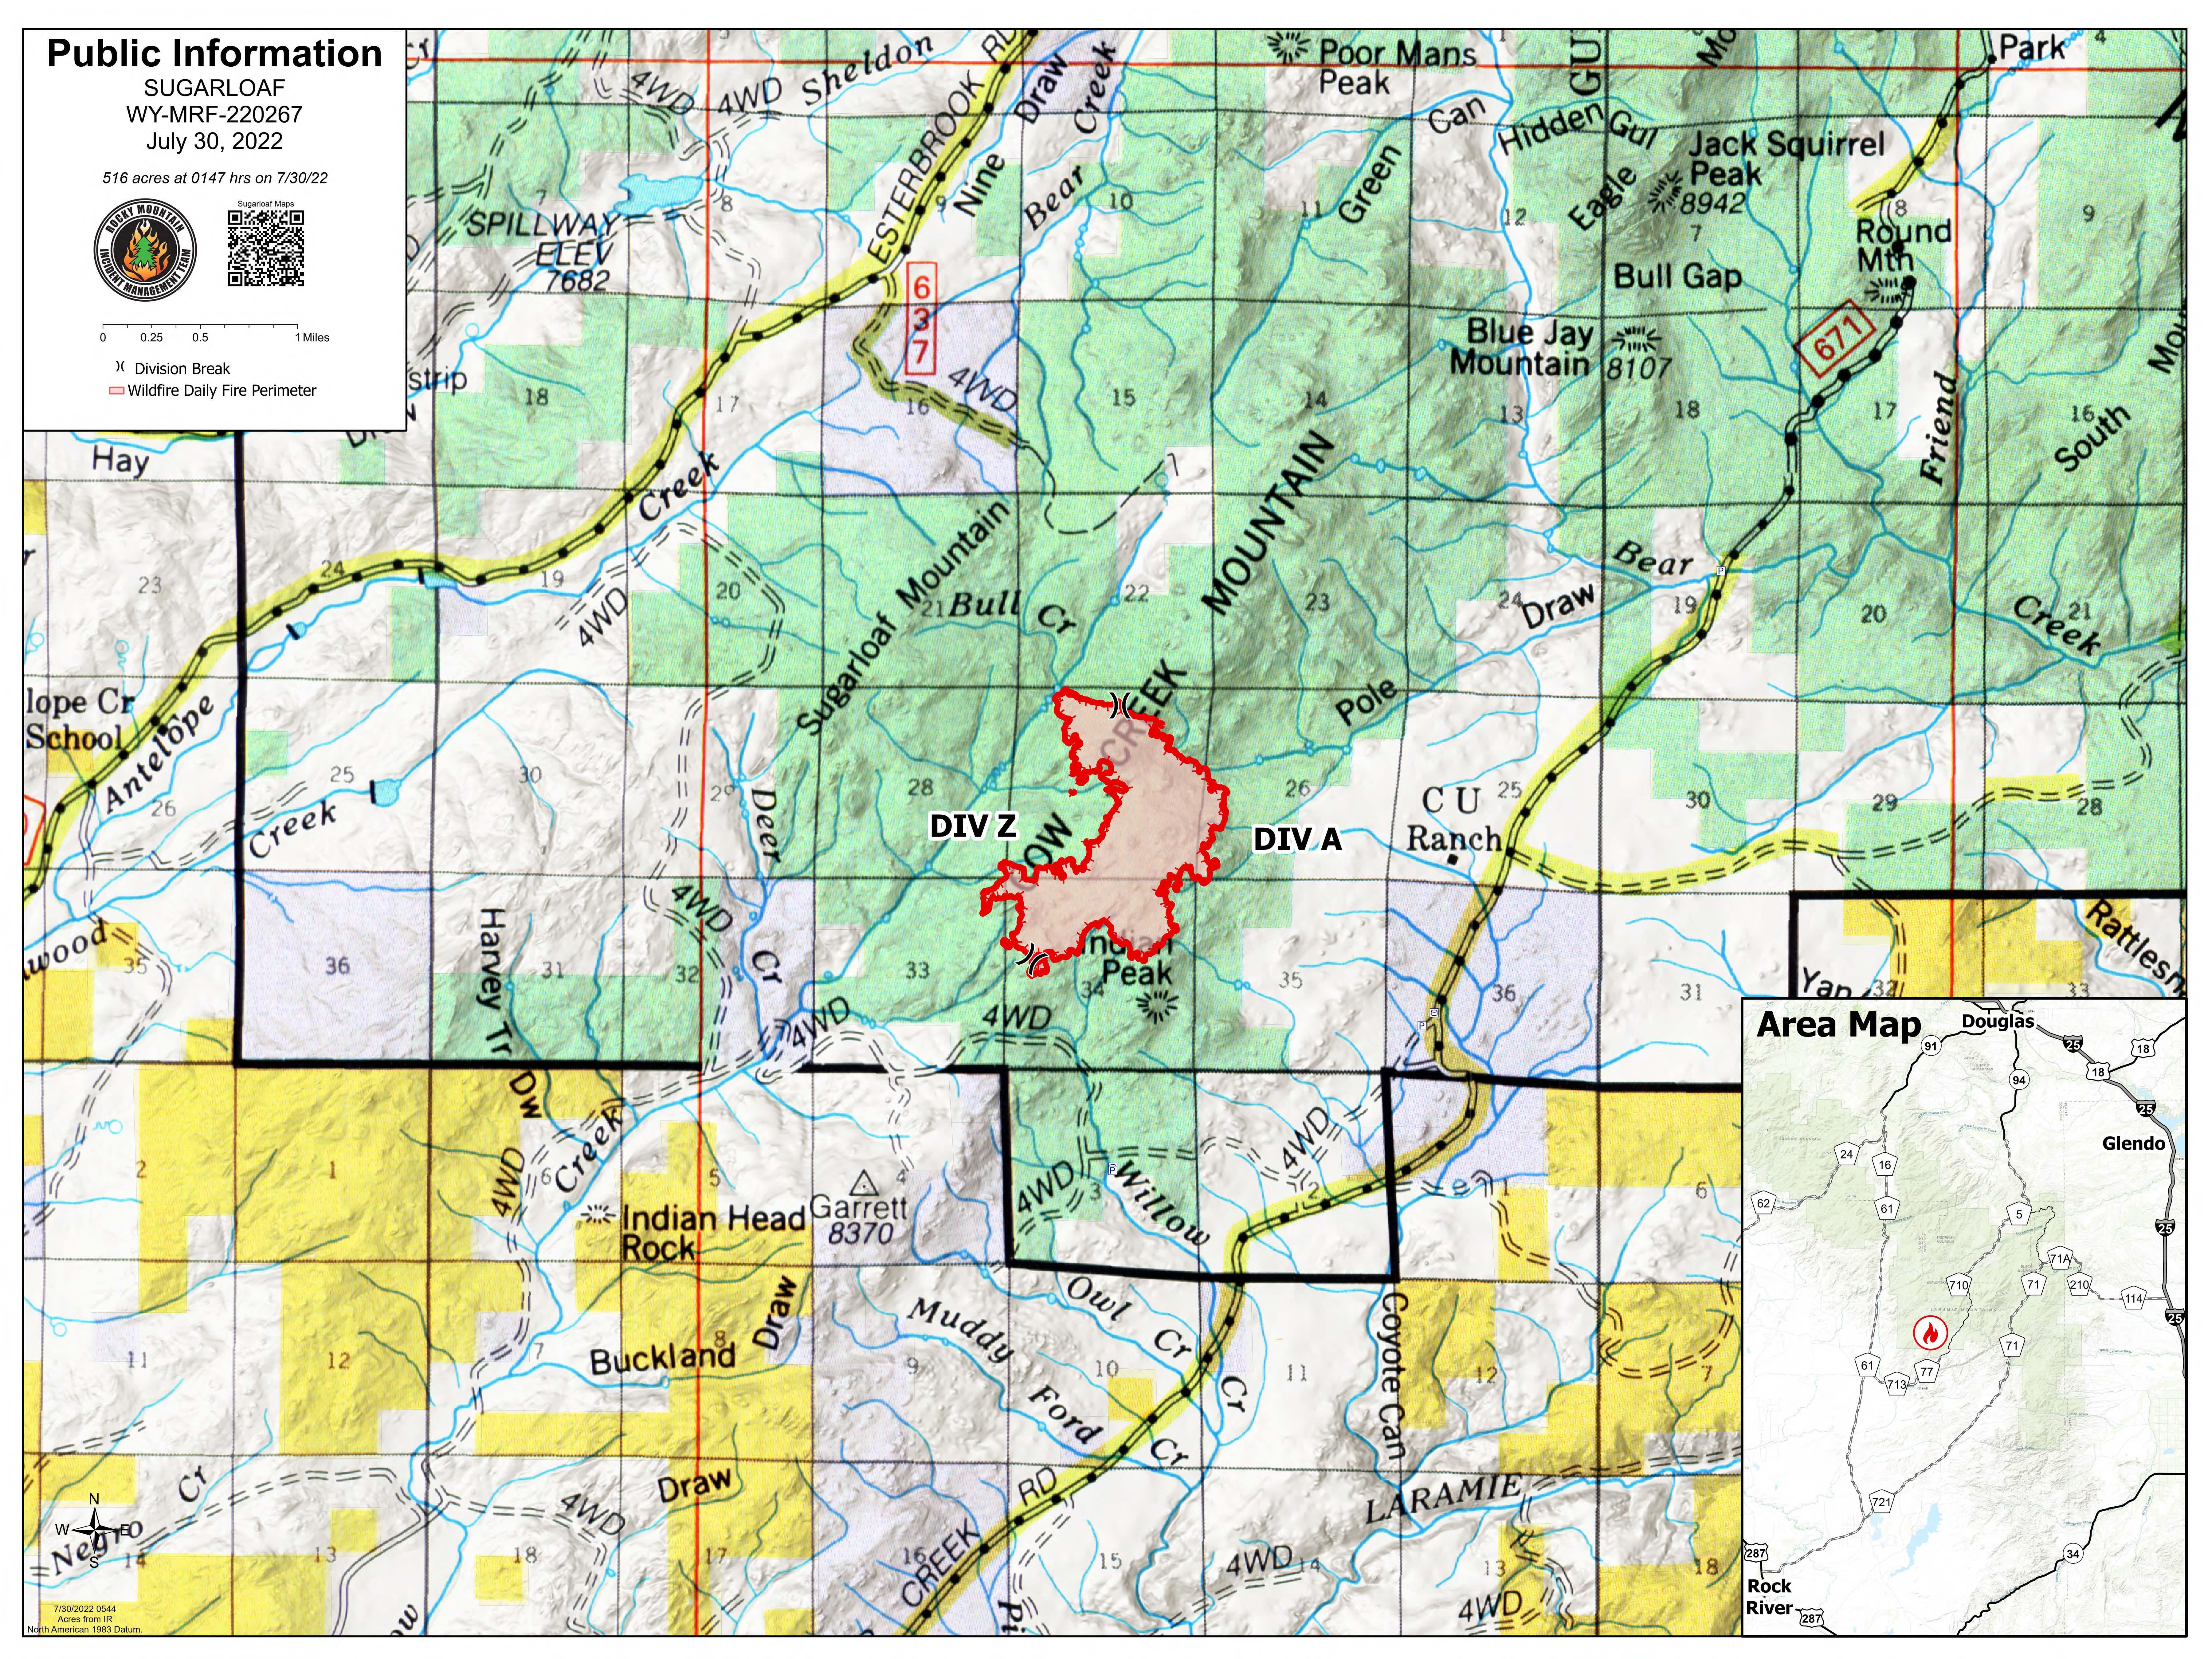 Sugarloaf Fire Public Information Map for July 30